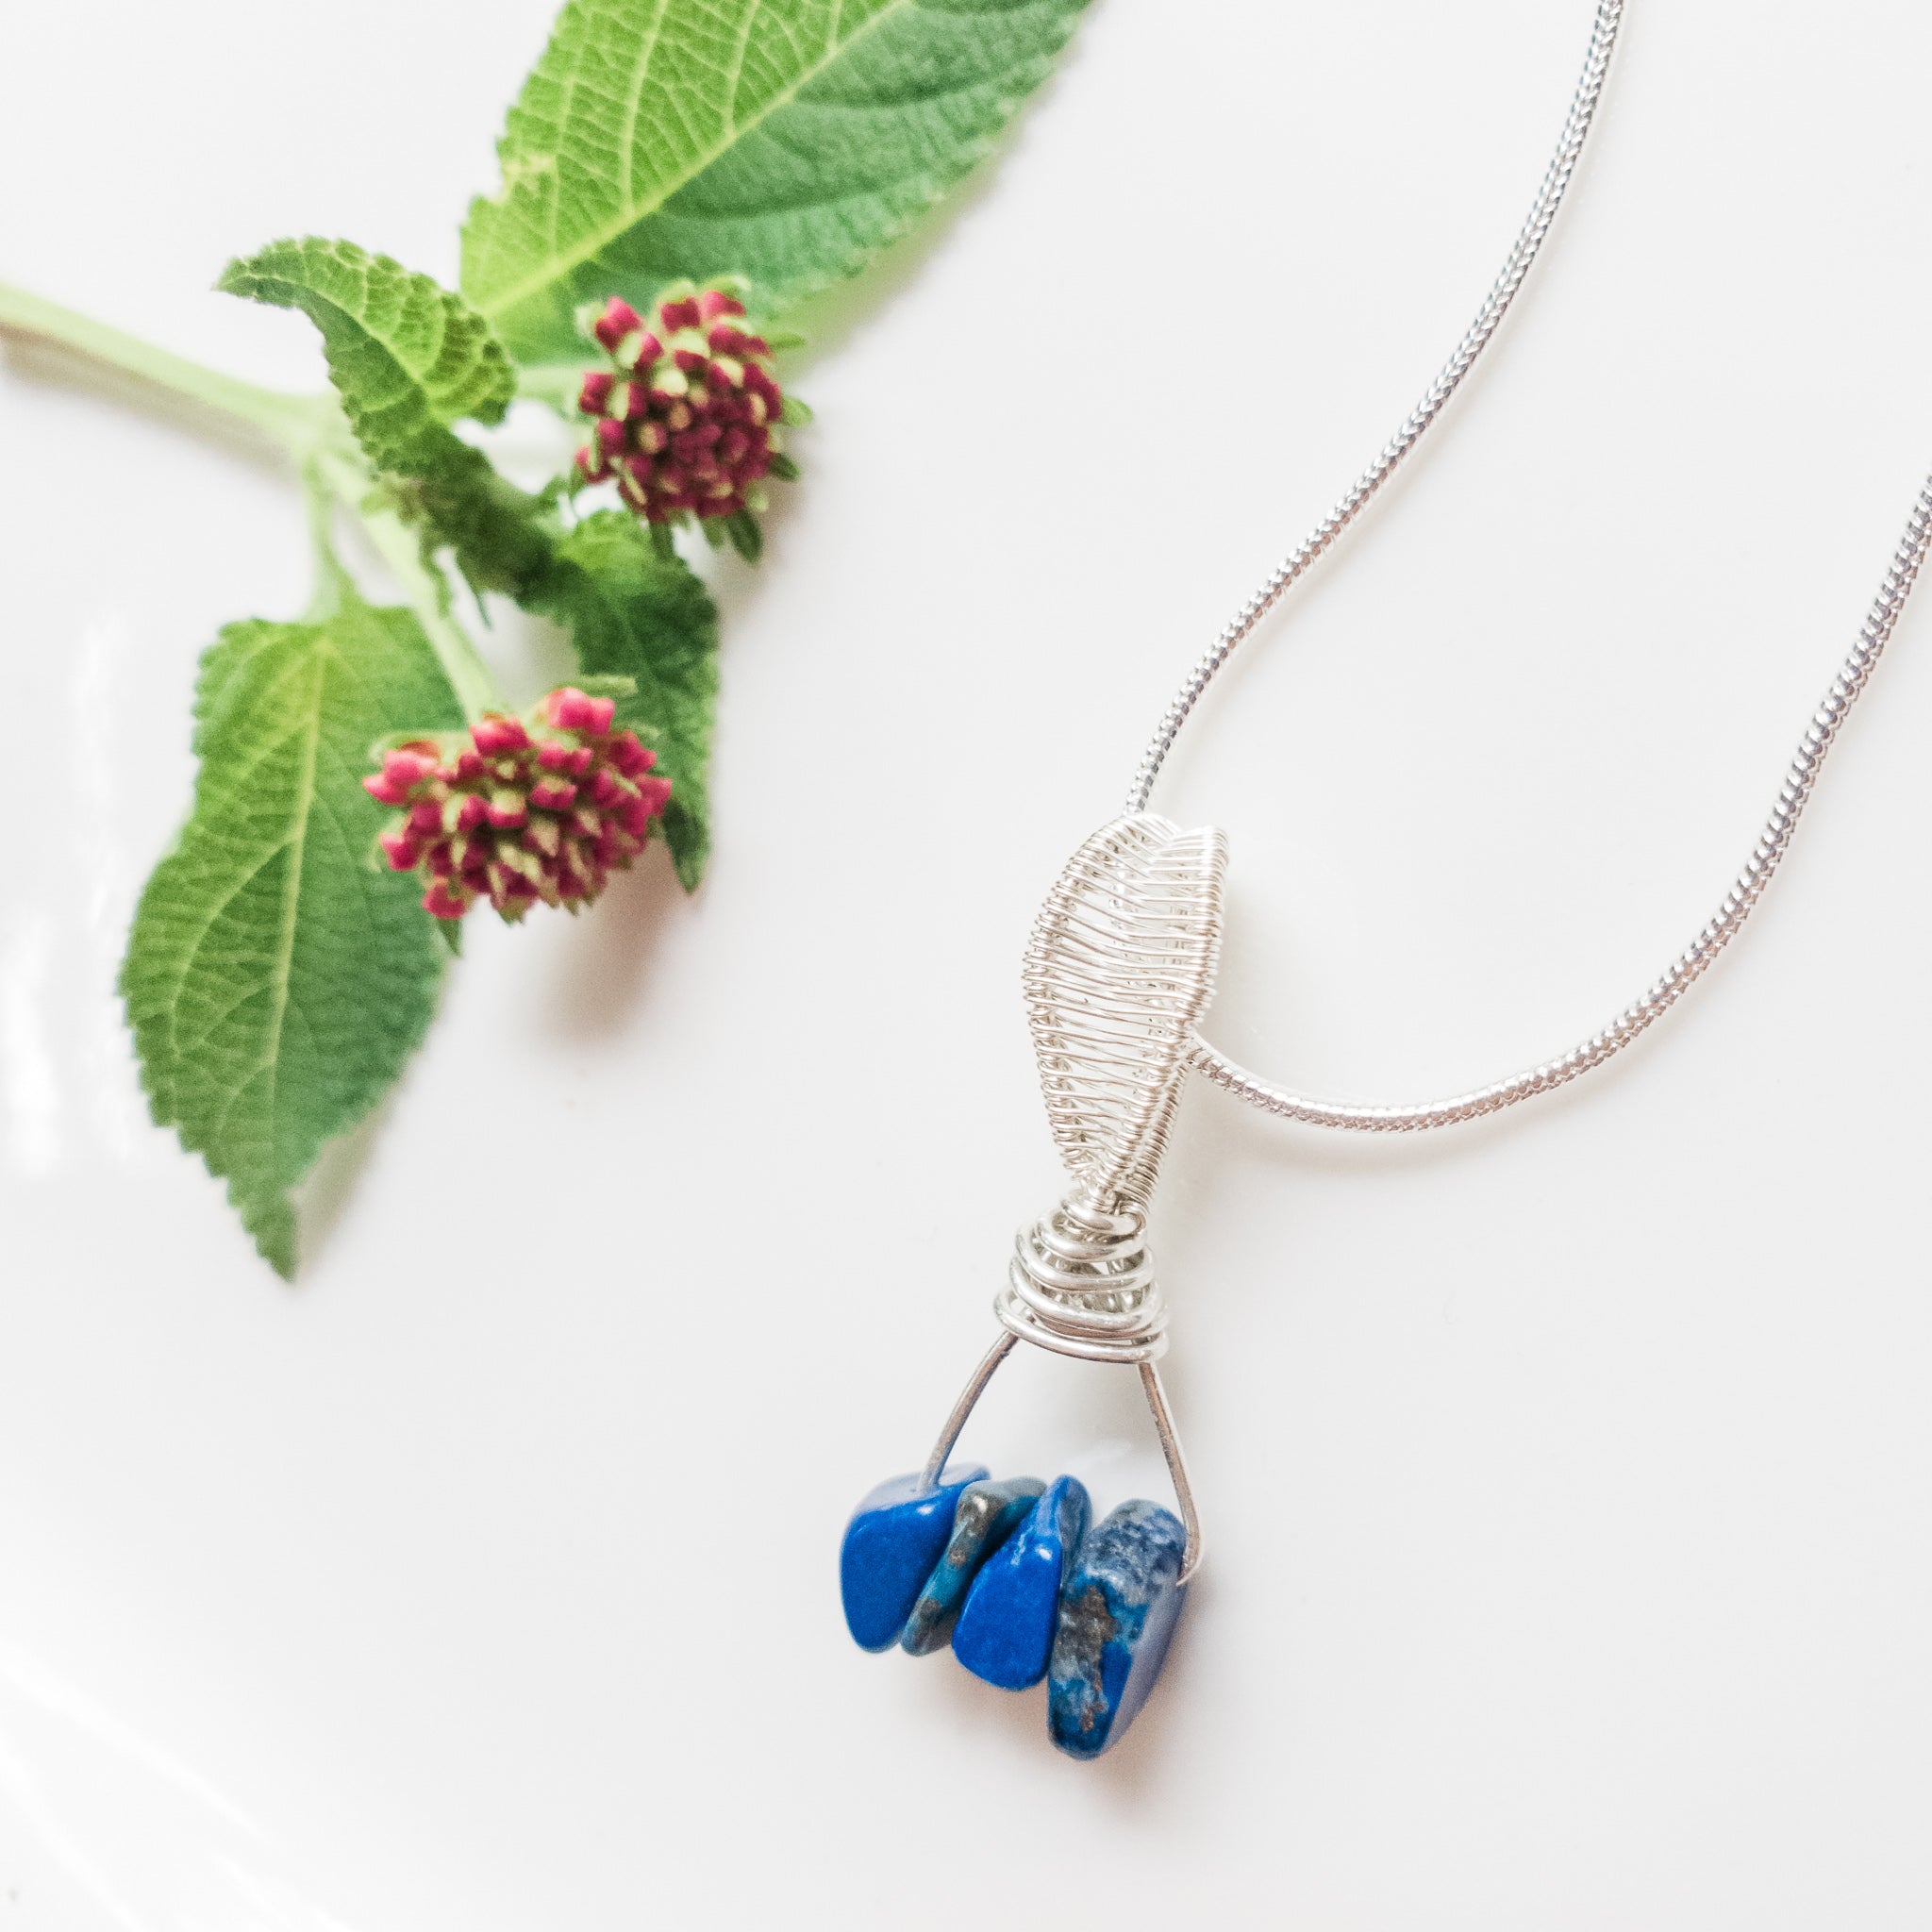 Laguna Collection - Inanna Style Lapis Lazuli Sterling Silver Necklace close-up view - BellaChel Jeweler